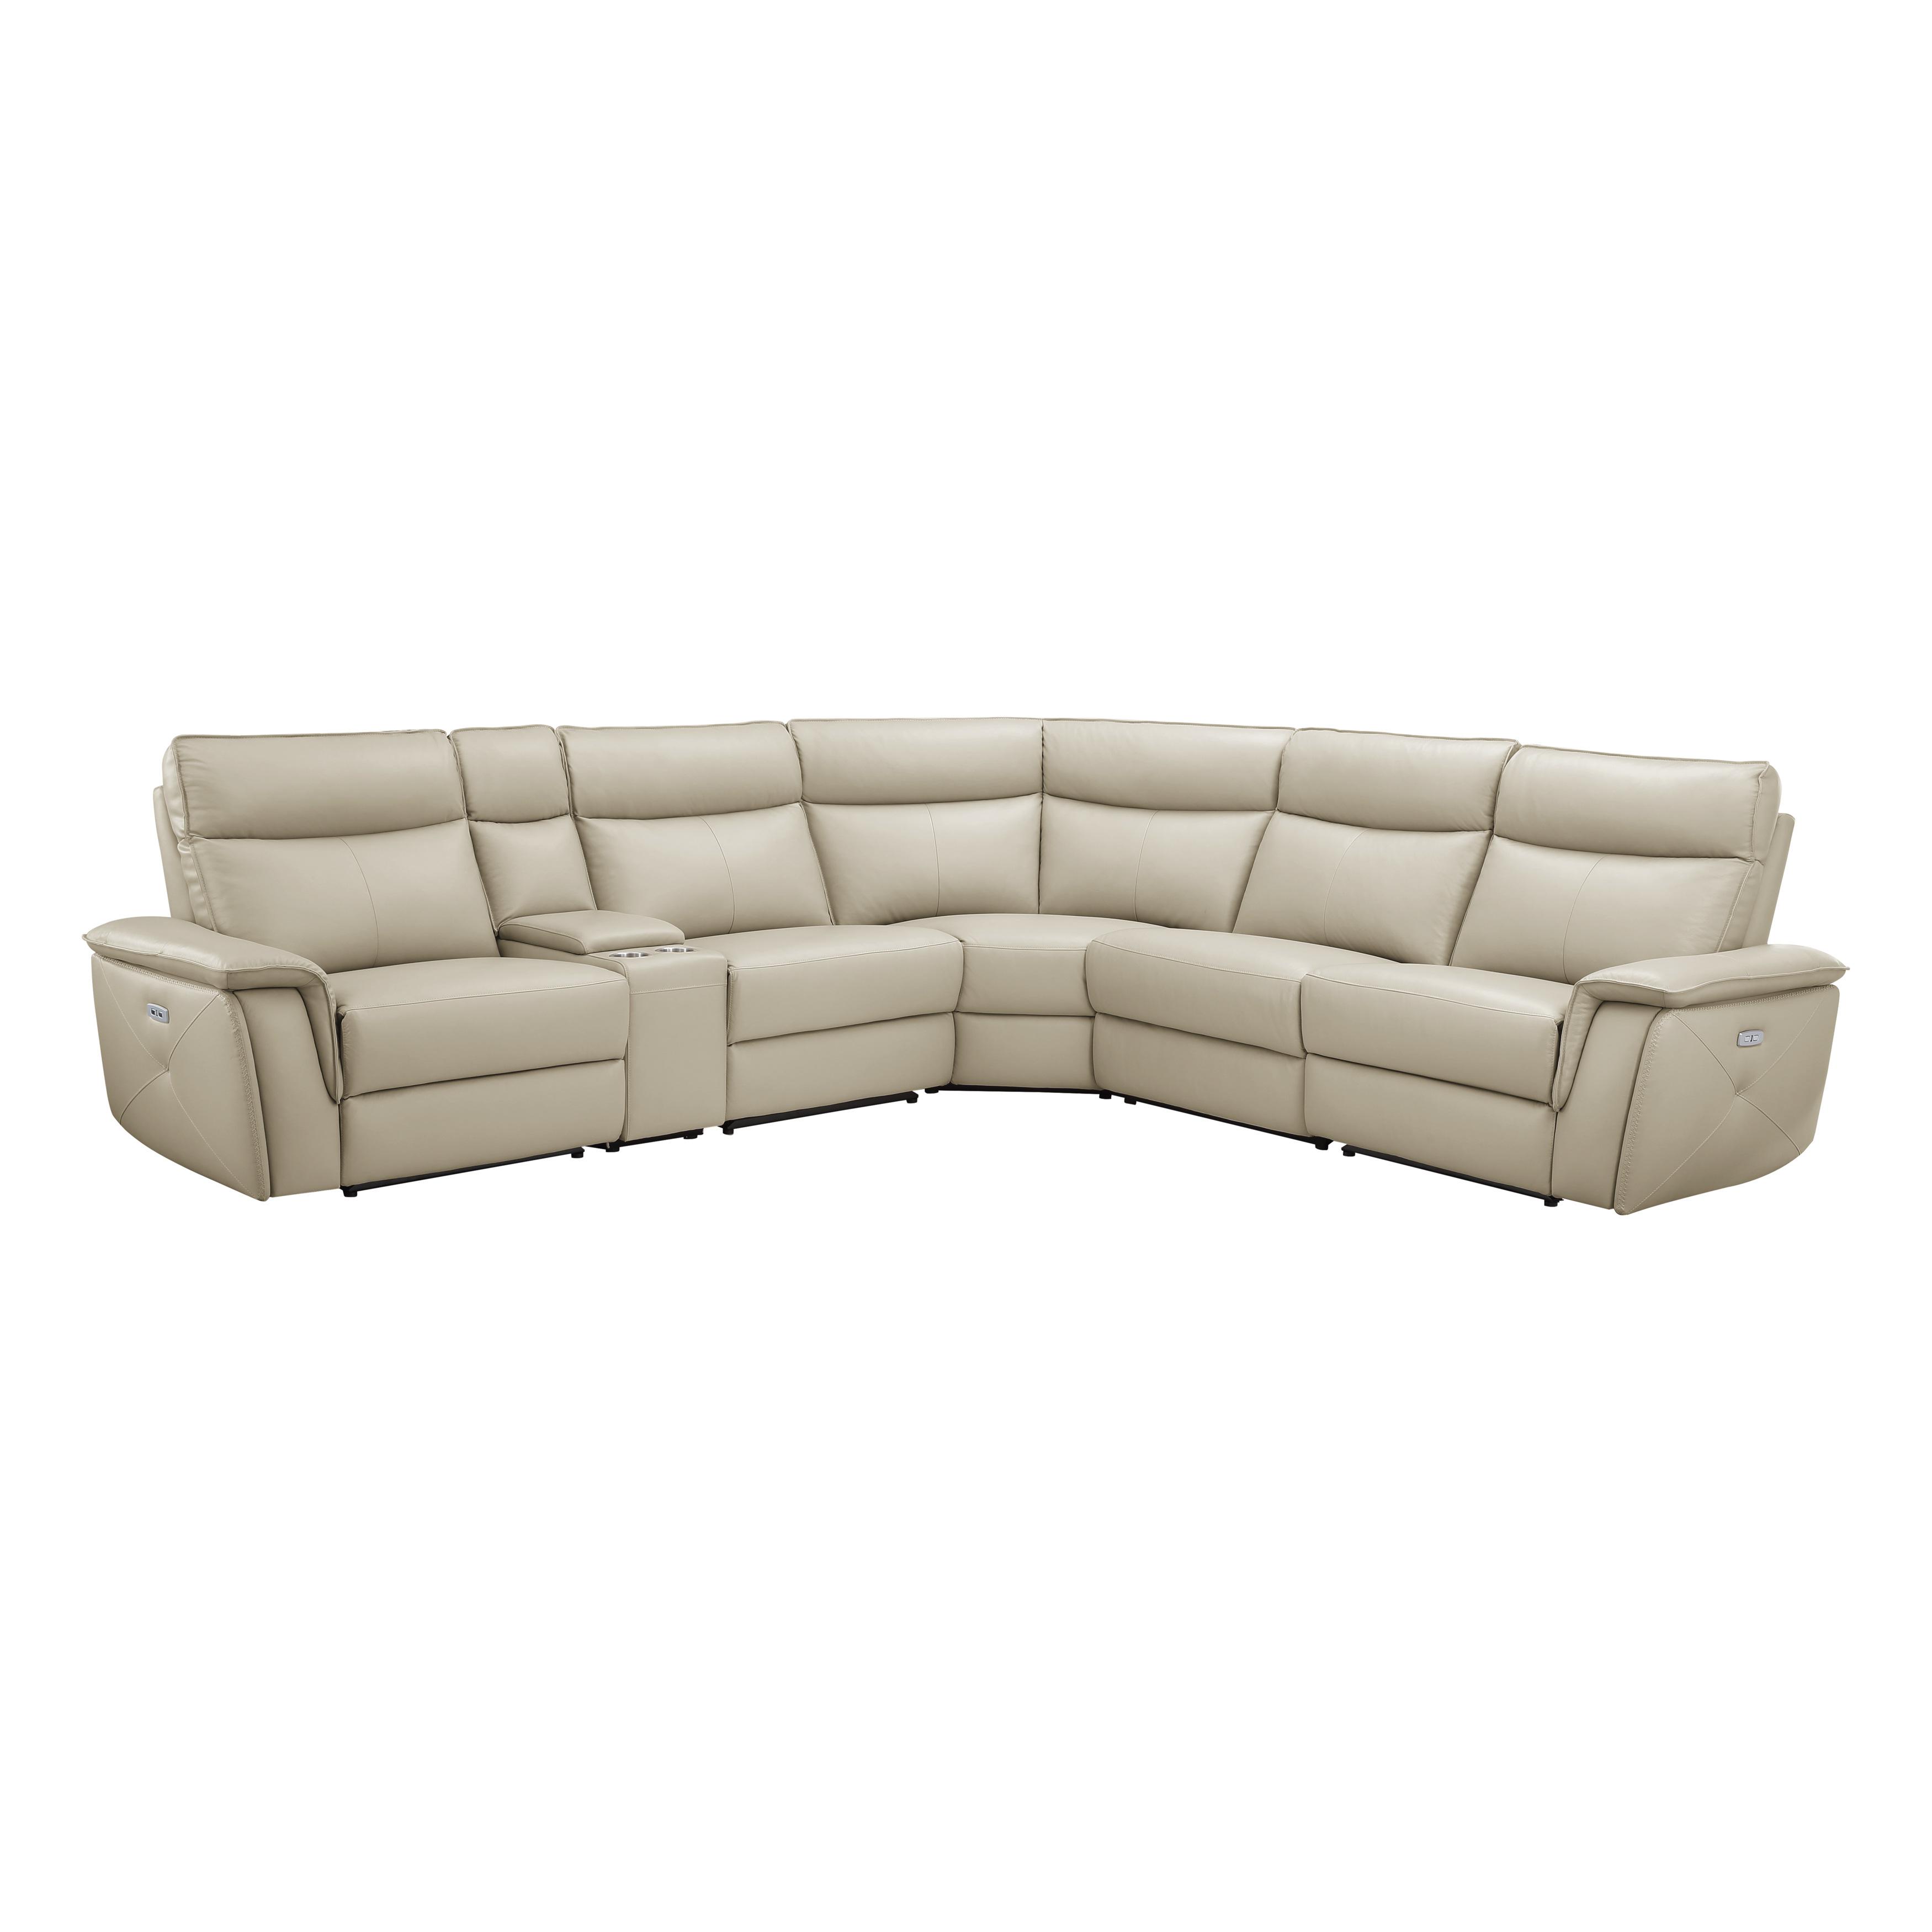 Classic Power Reclining Sectional 8259RFTP*6SCPWH Maroni 8259RFTP*6SCPWH in Taupe Leather